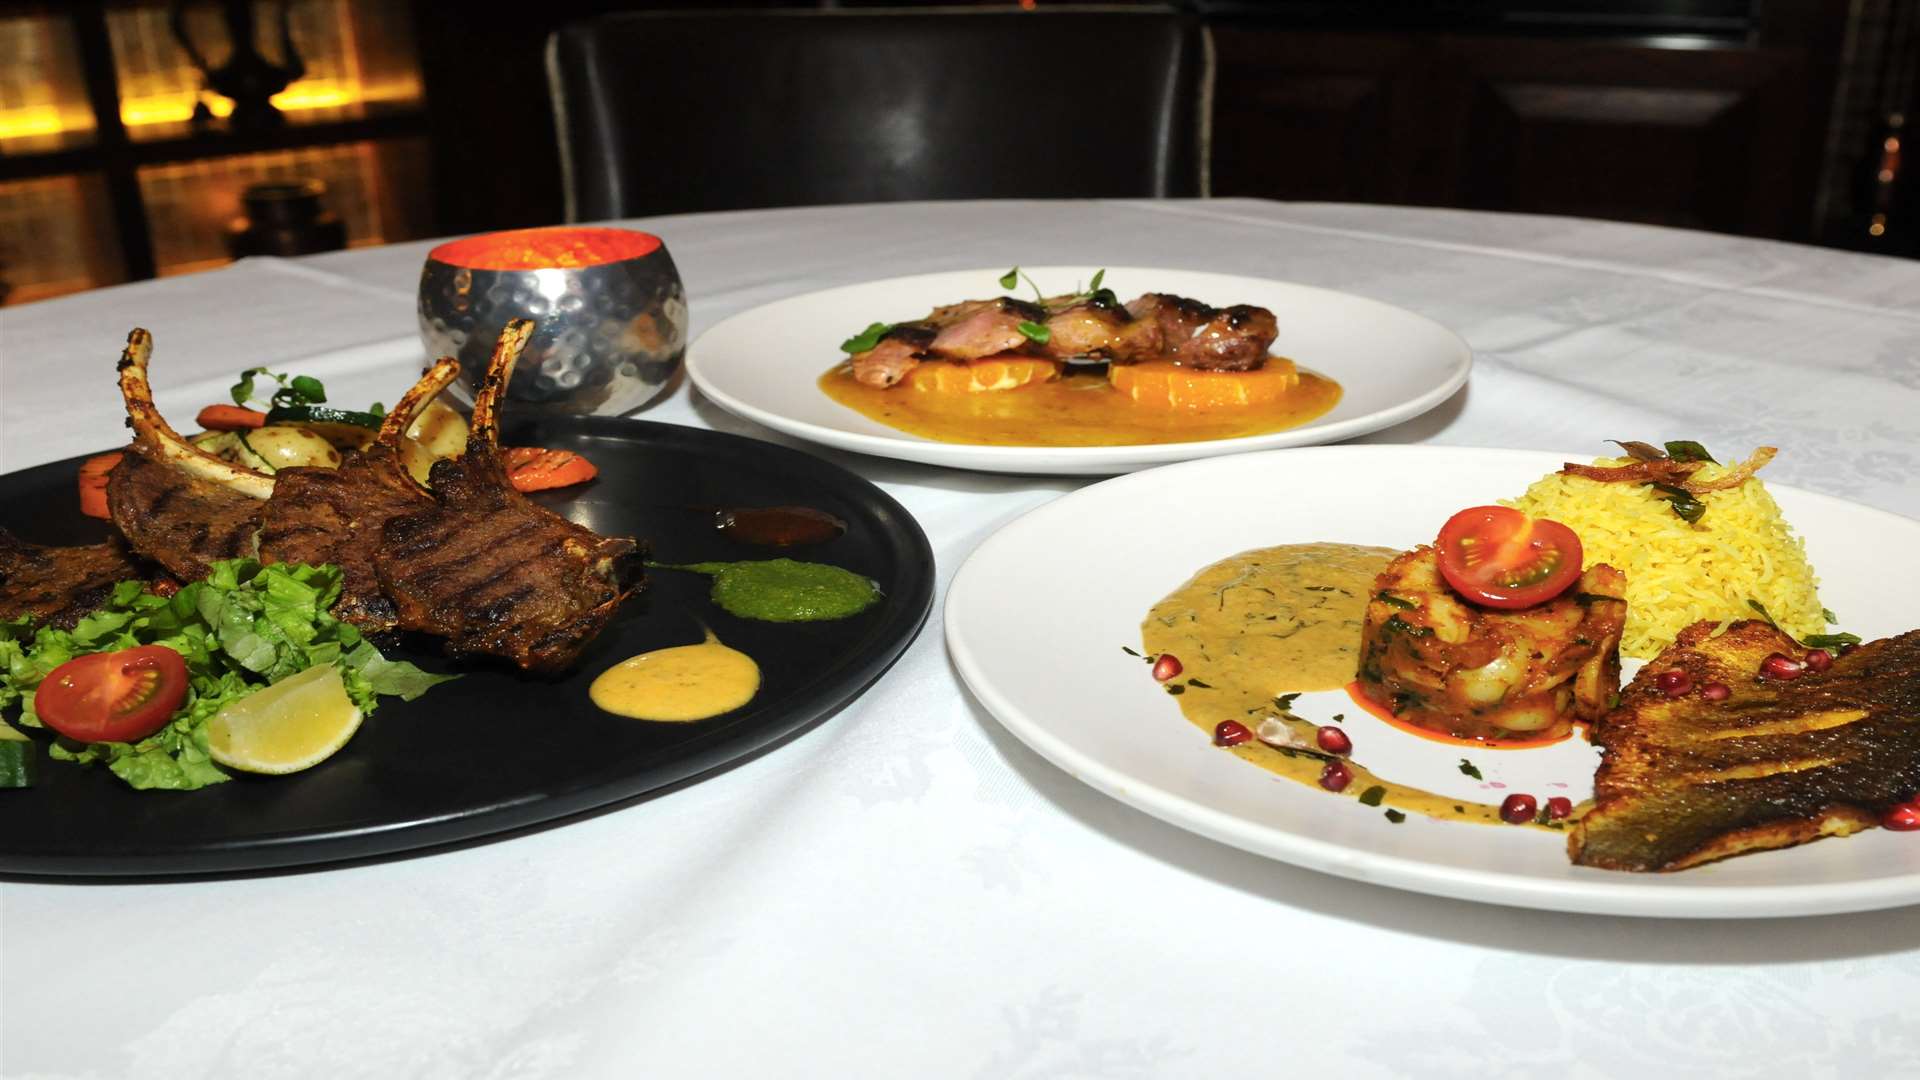 The Shozna menu is packed with tempting Indian and Bangladeshi dishes